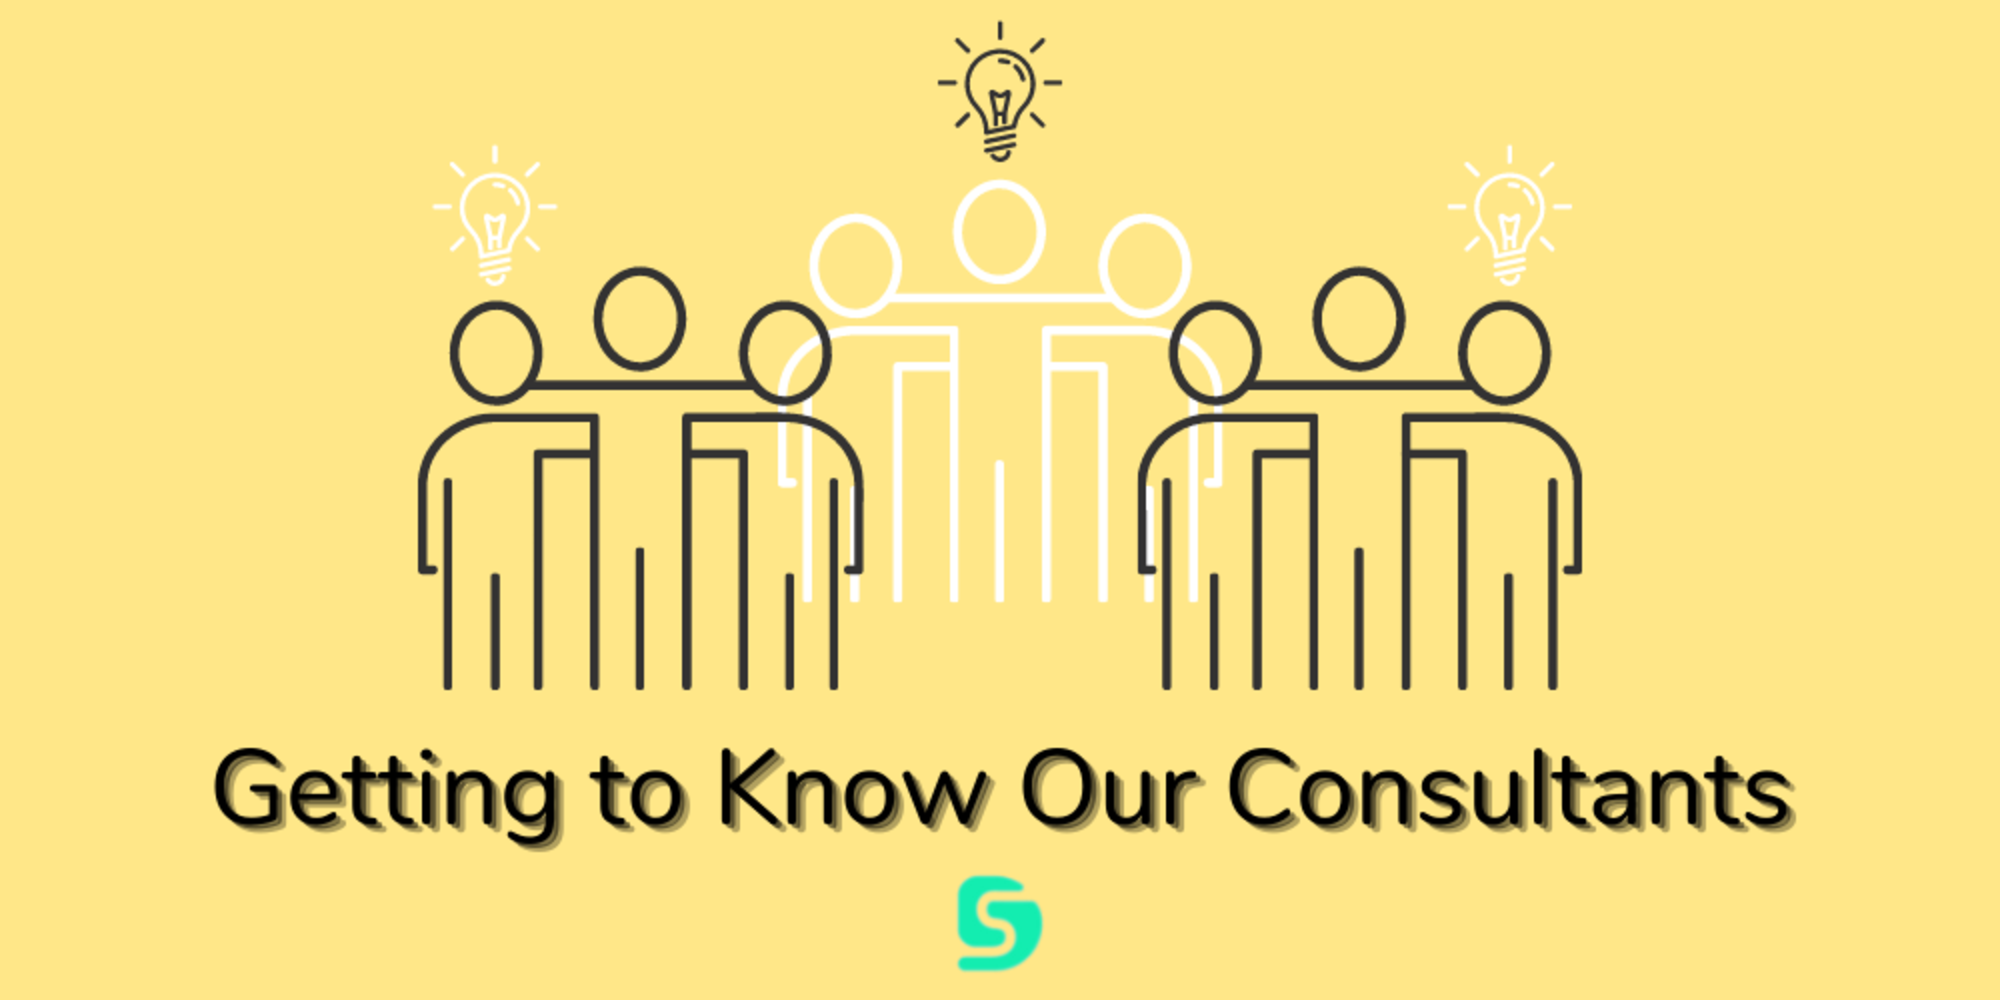 Getting To Know Our Consultants   10 Questions Over 10 Weeks (7)